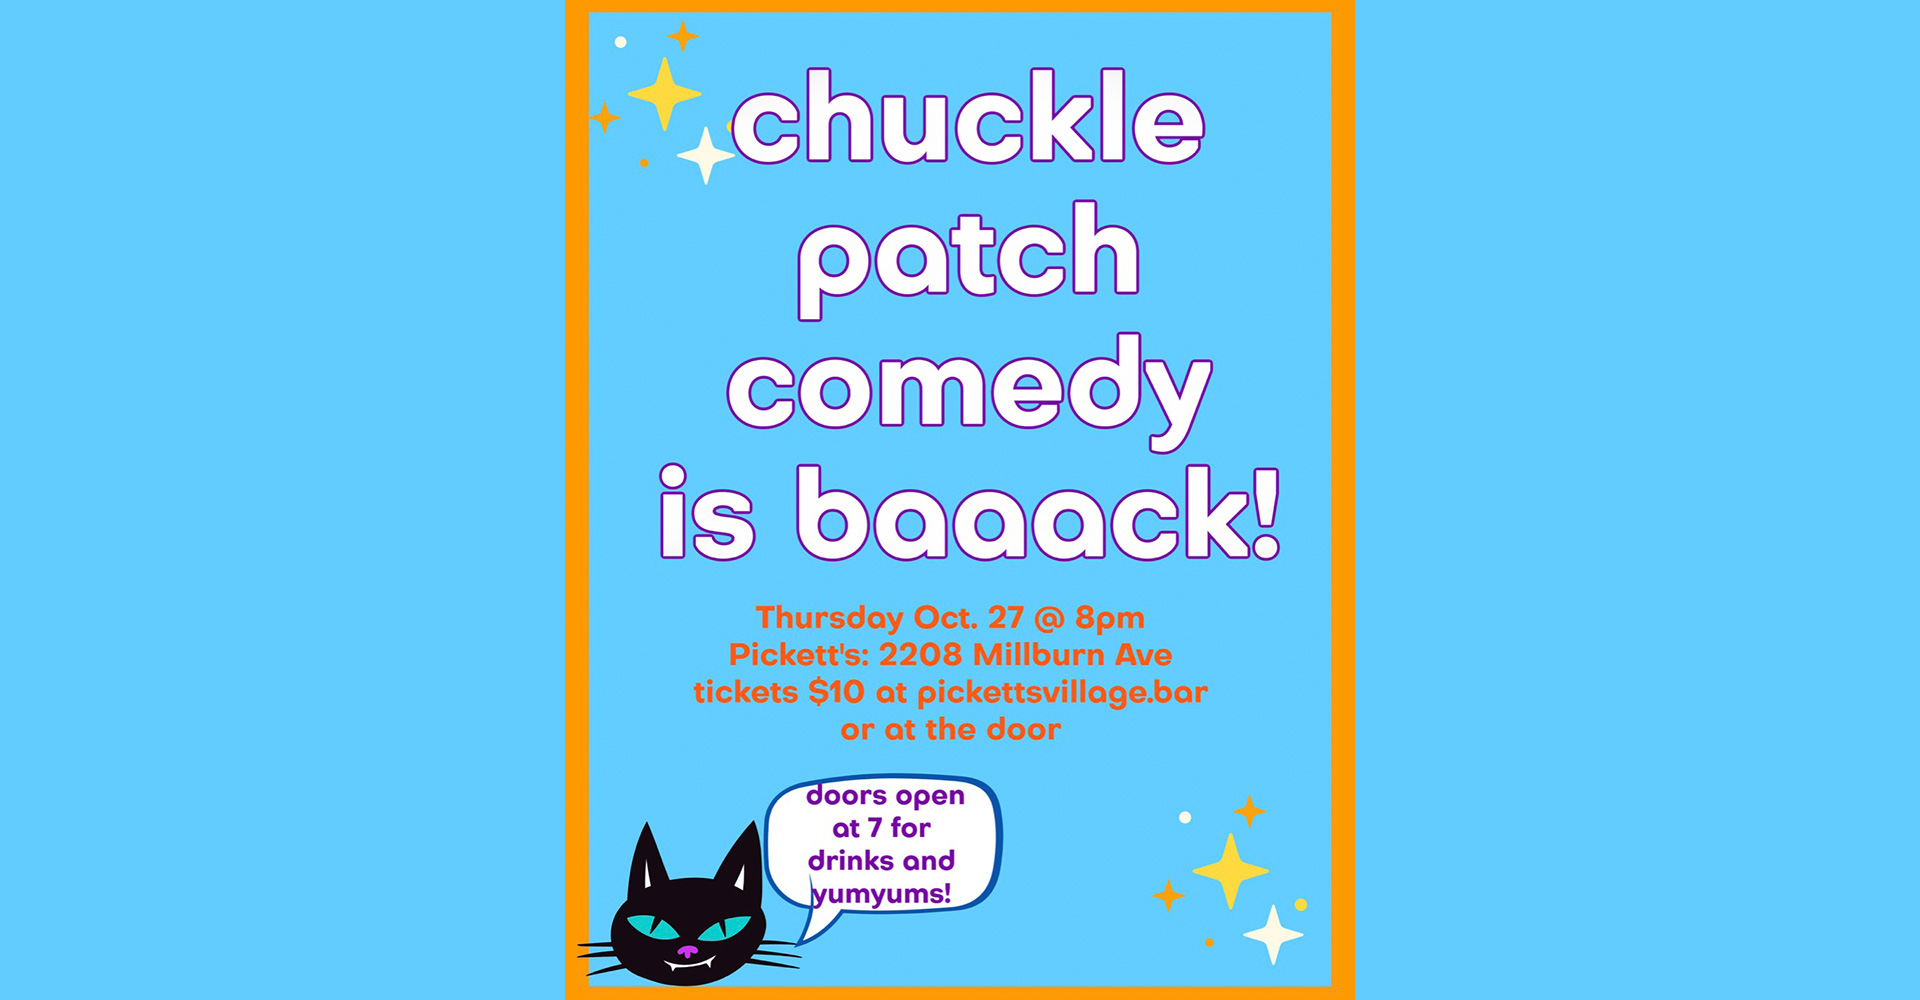 The Chuckle Patch Comedy Show